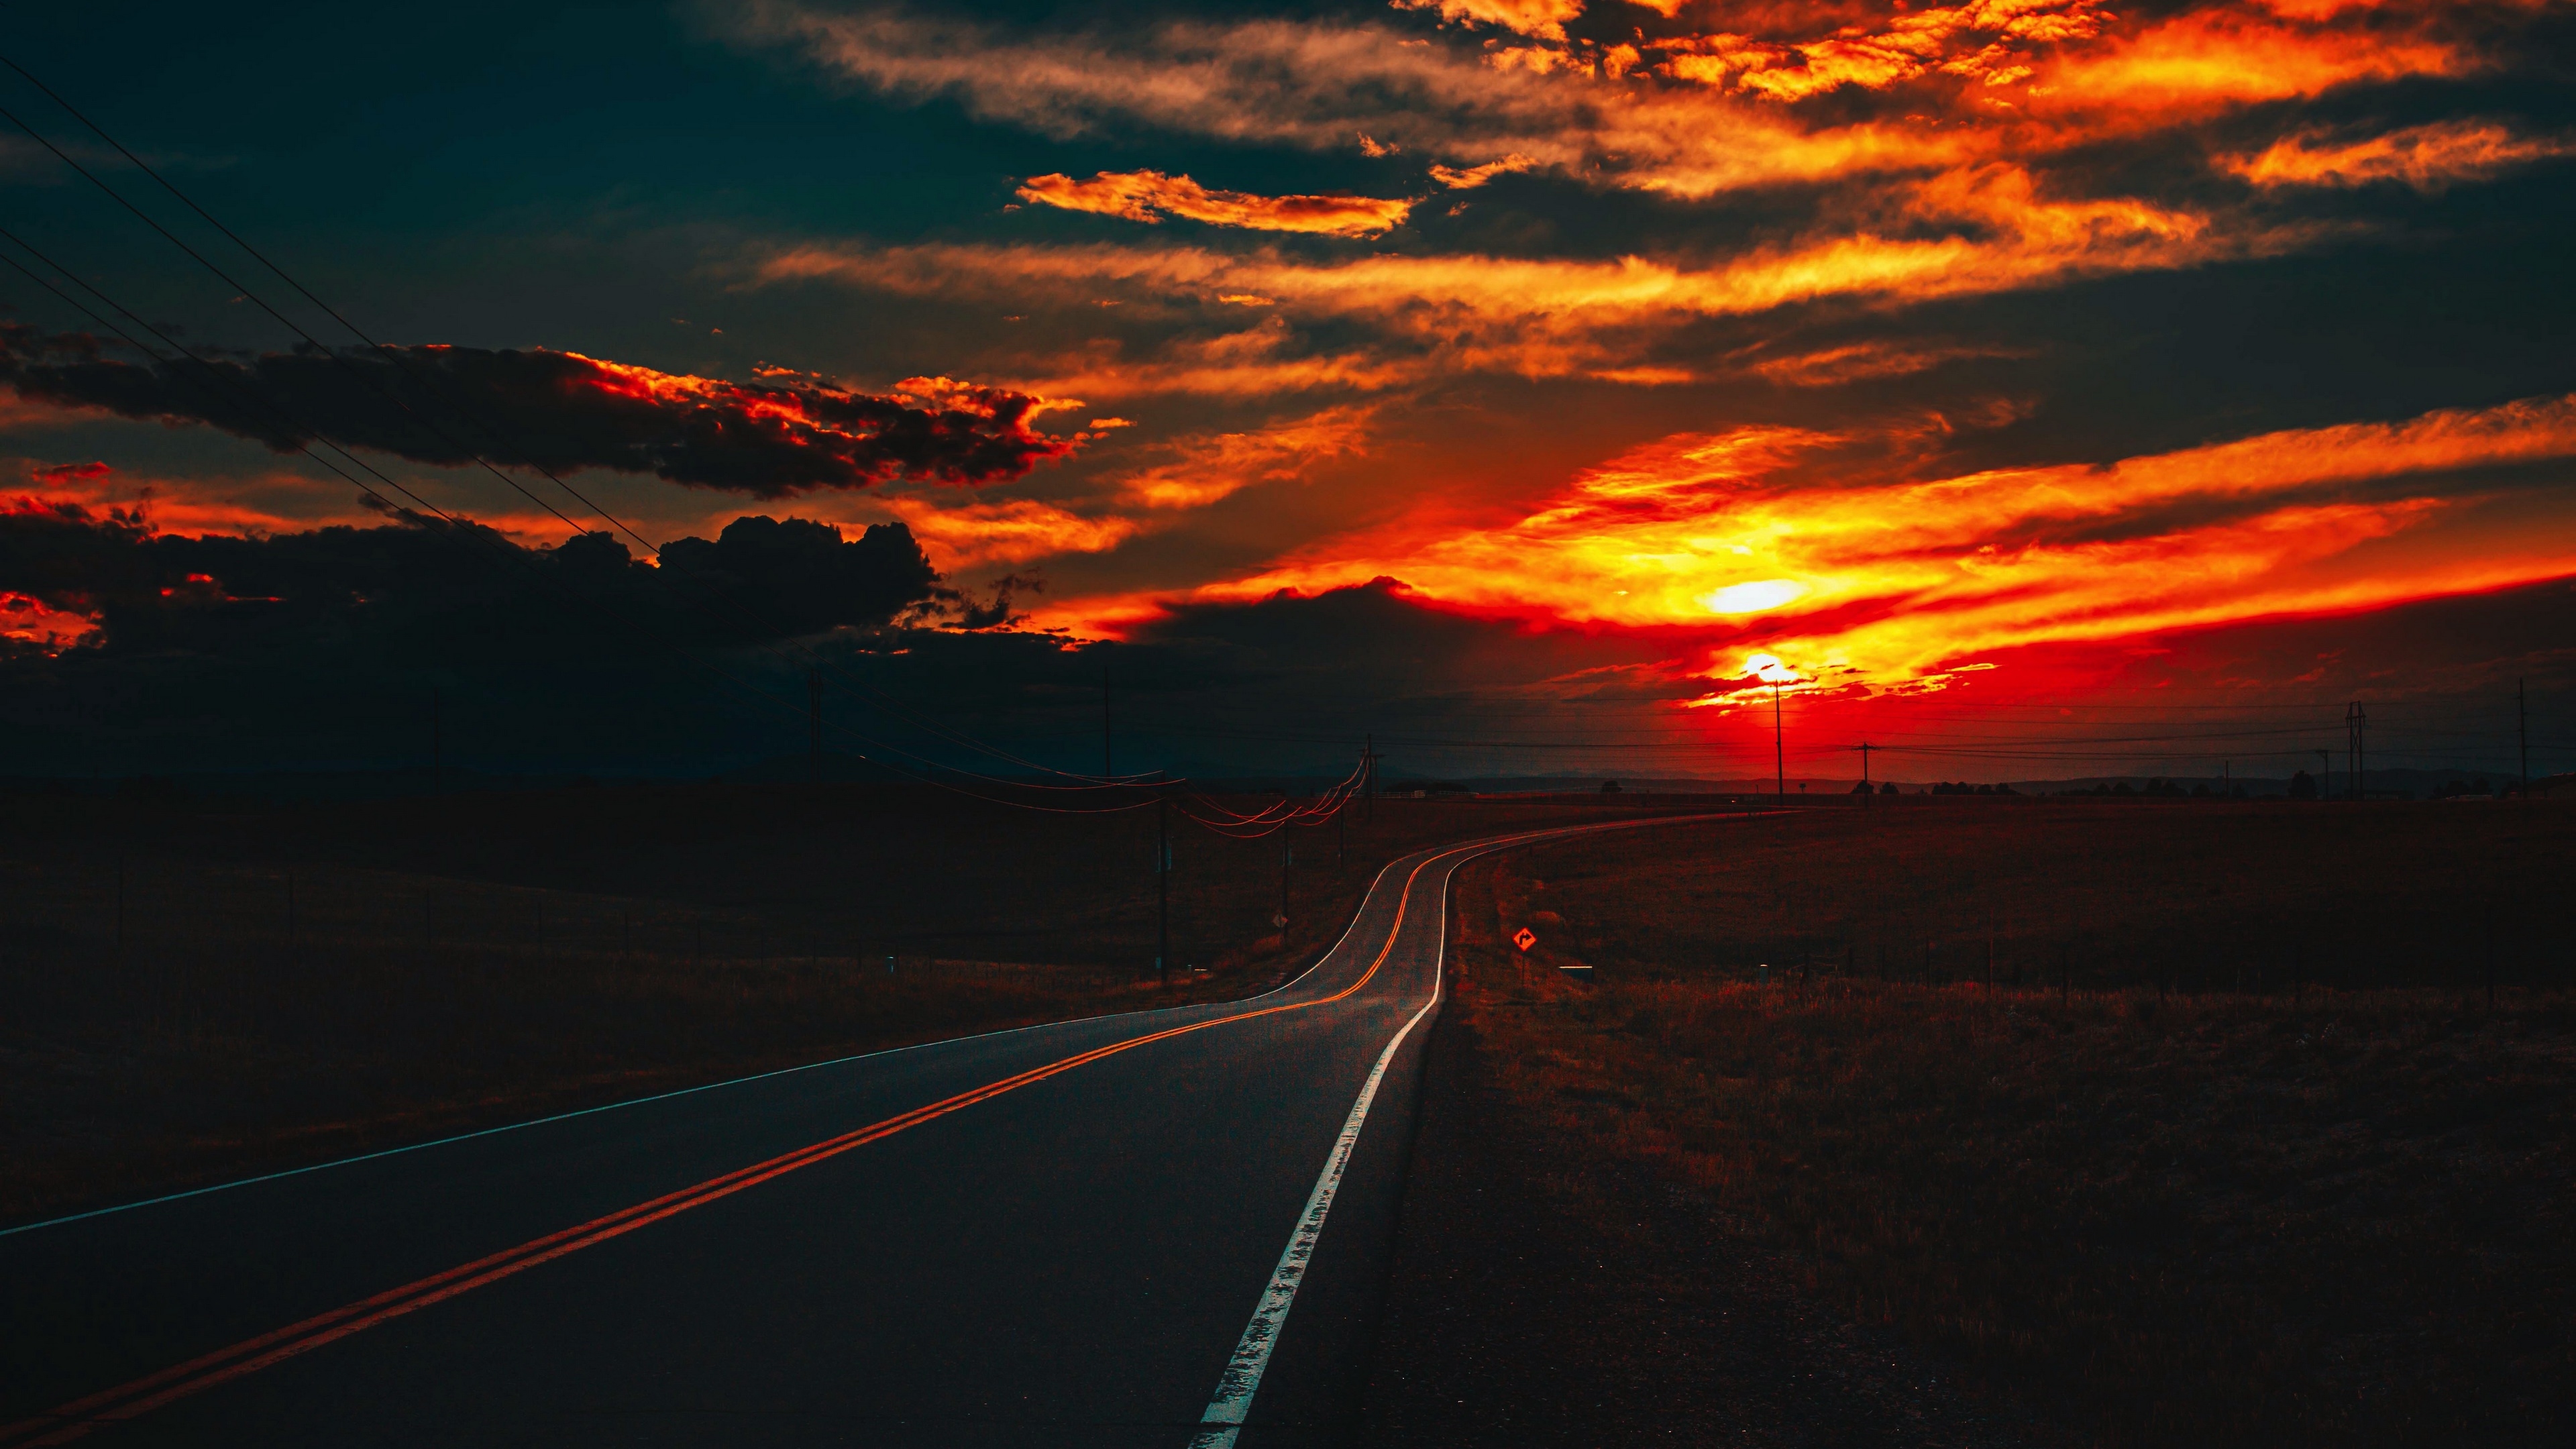 Fire Sunset at Road 4K Wallpaper, HD Nature 4K Wallpapers, Images